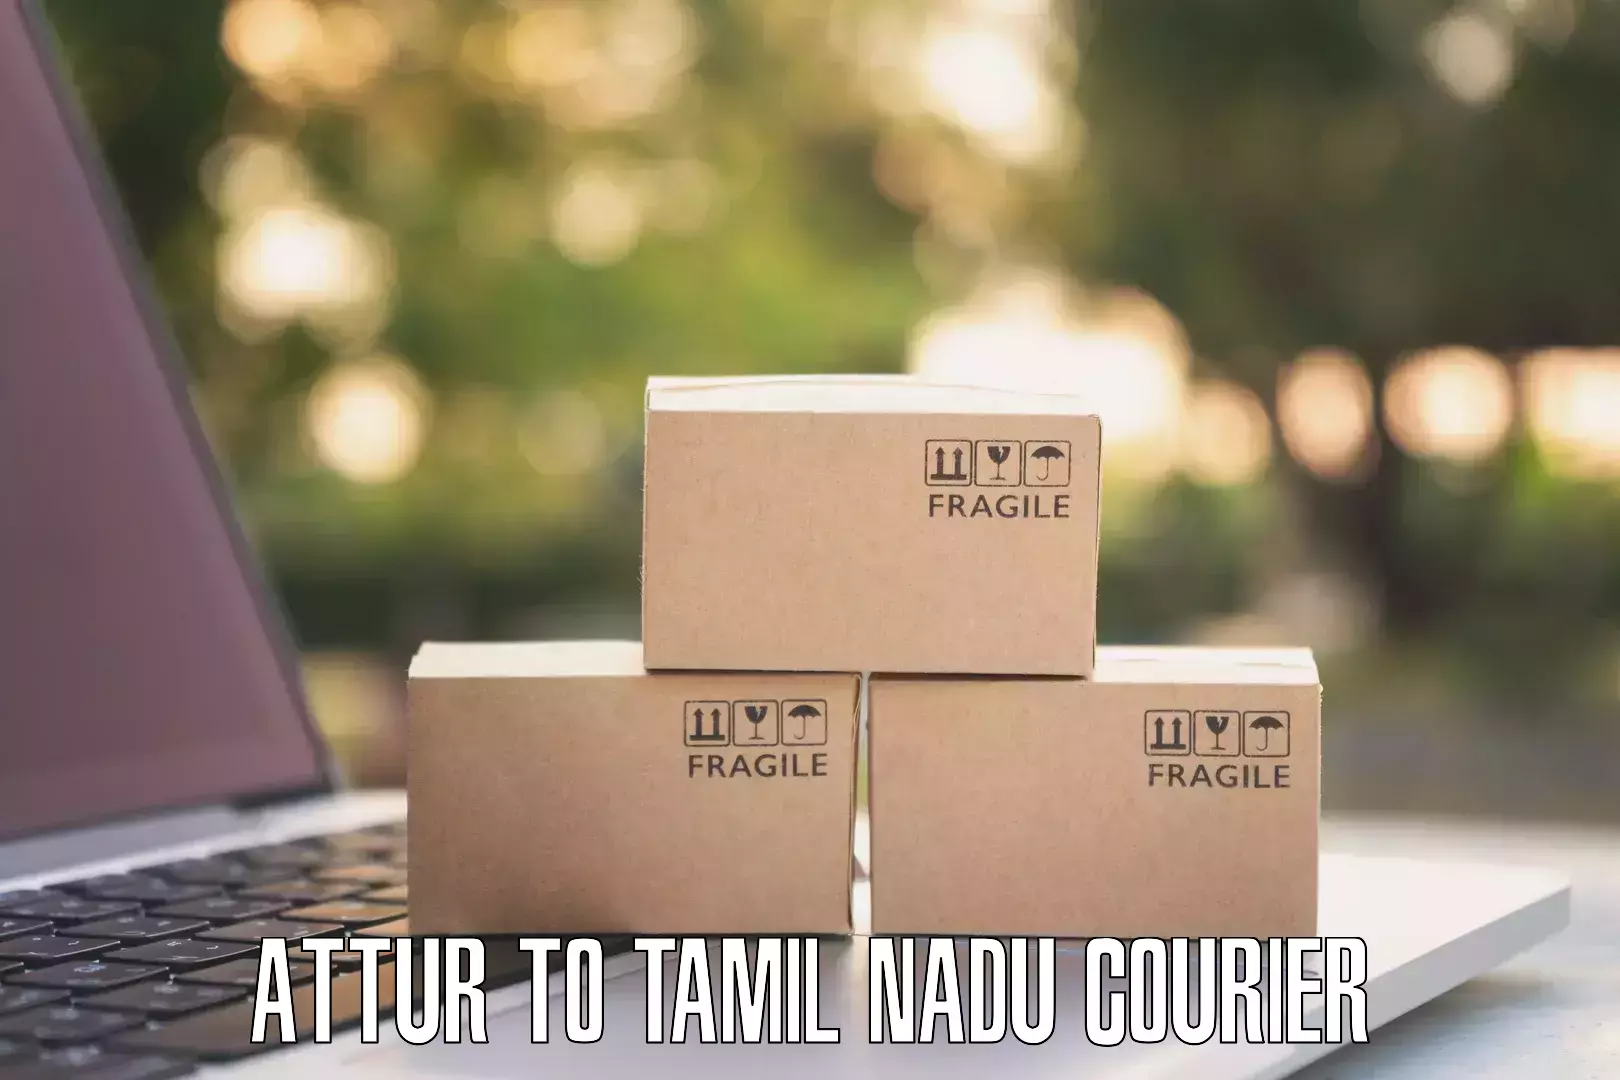 Next-day delivery options Attur to Kagithapuram